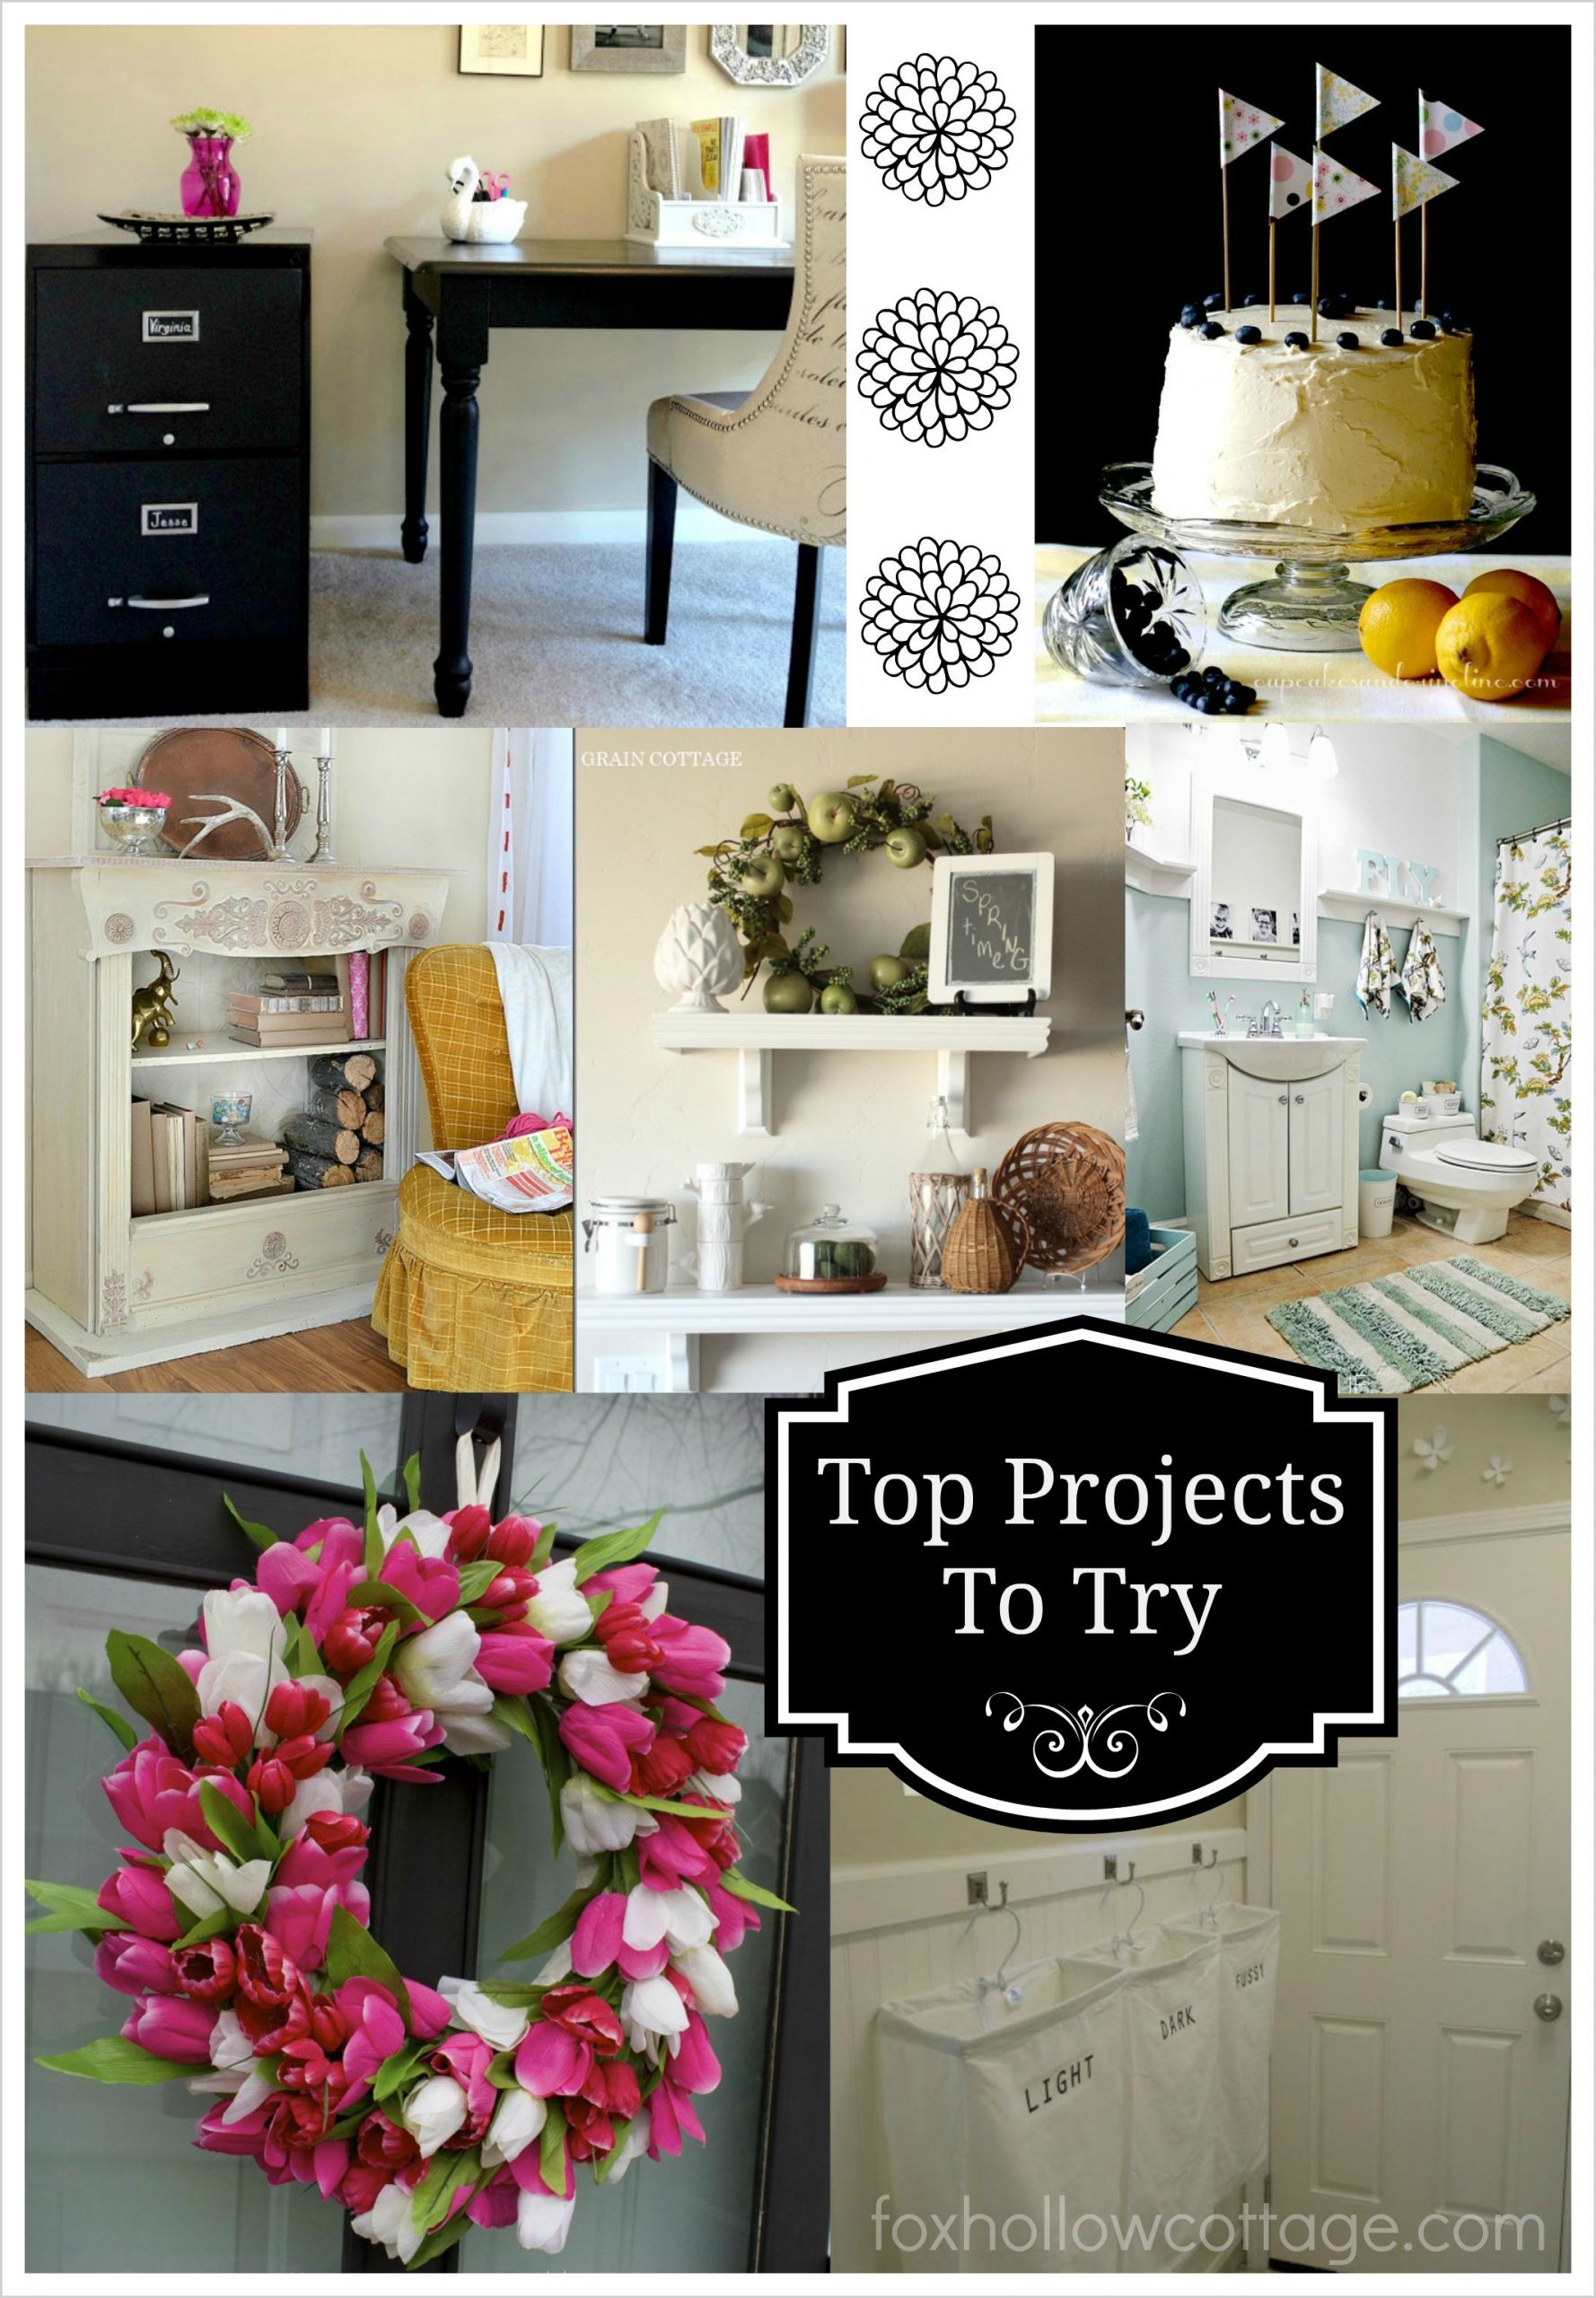 DIY Home Decorating Blogs
 Power Pinterest Link Party and Friday Fav Features 